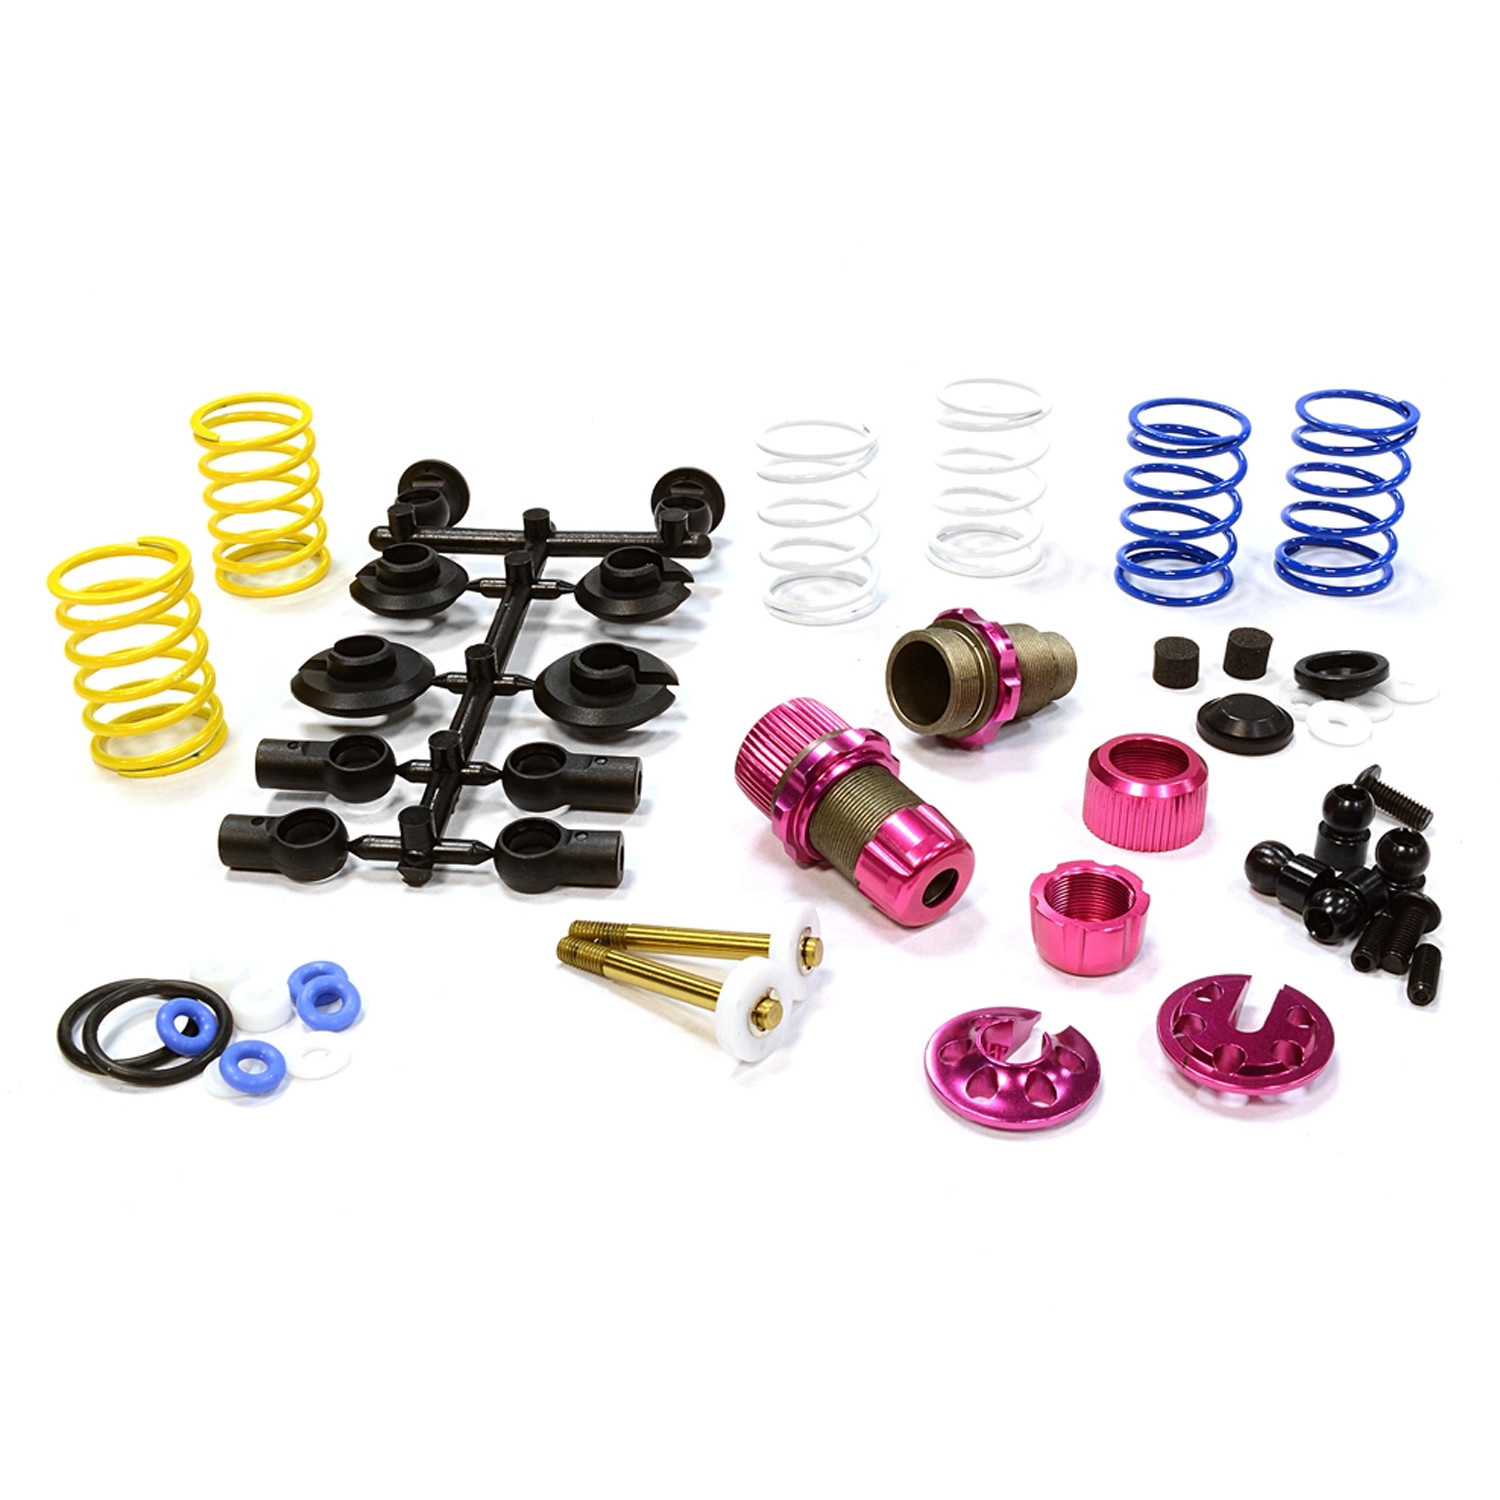 C25910PINK Pink XSR11 Competition 52-55MM Racing Shocks (2)